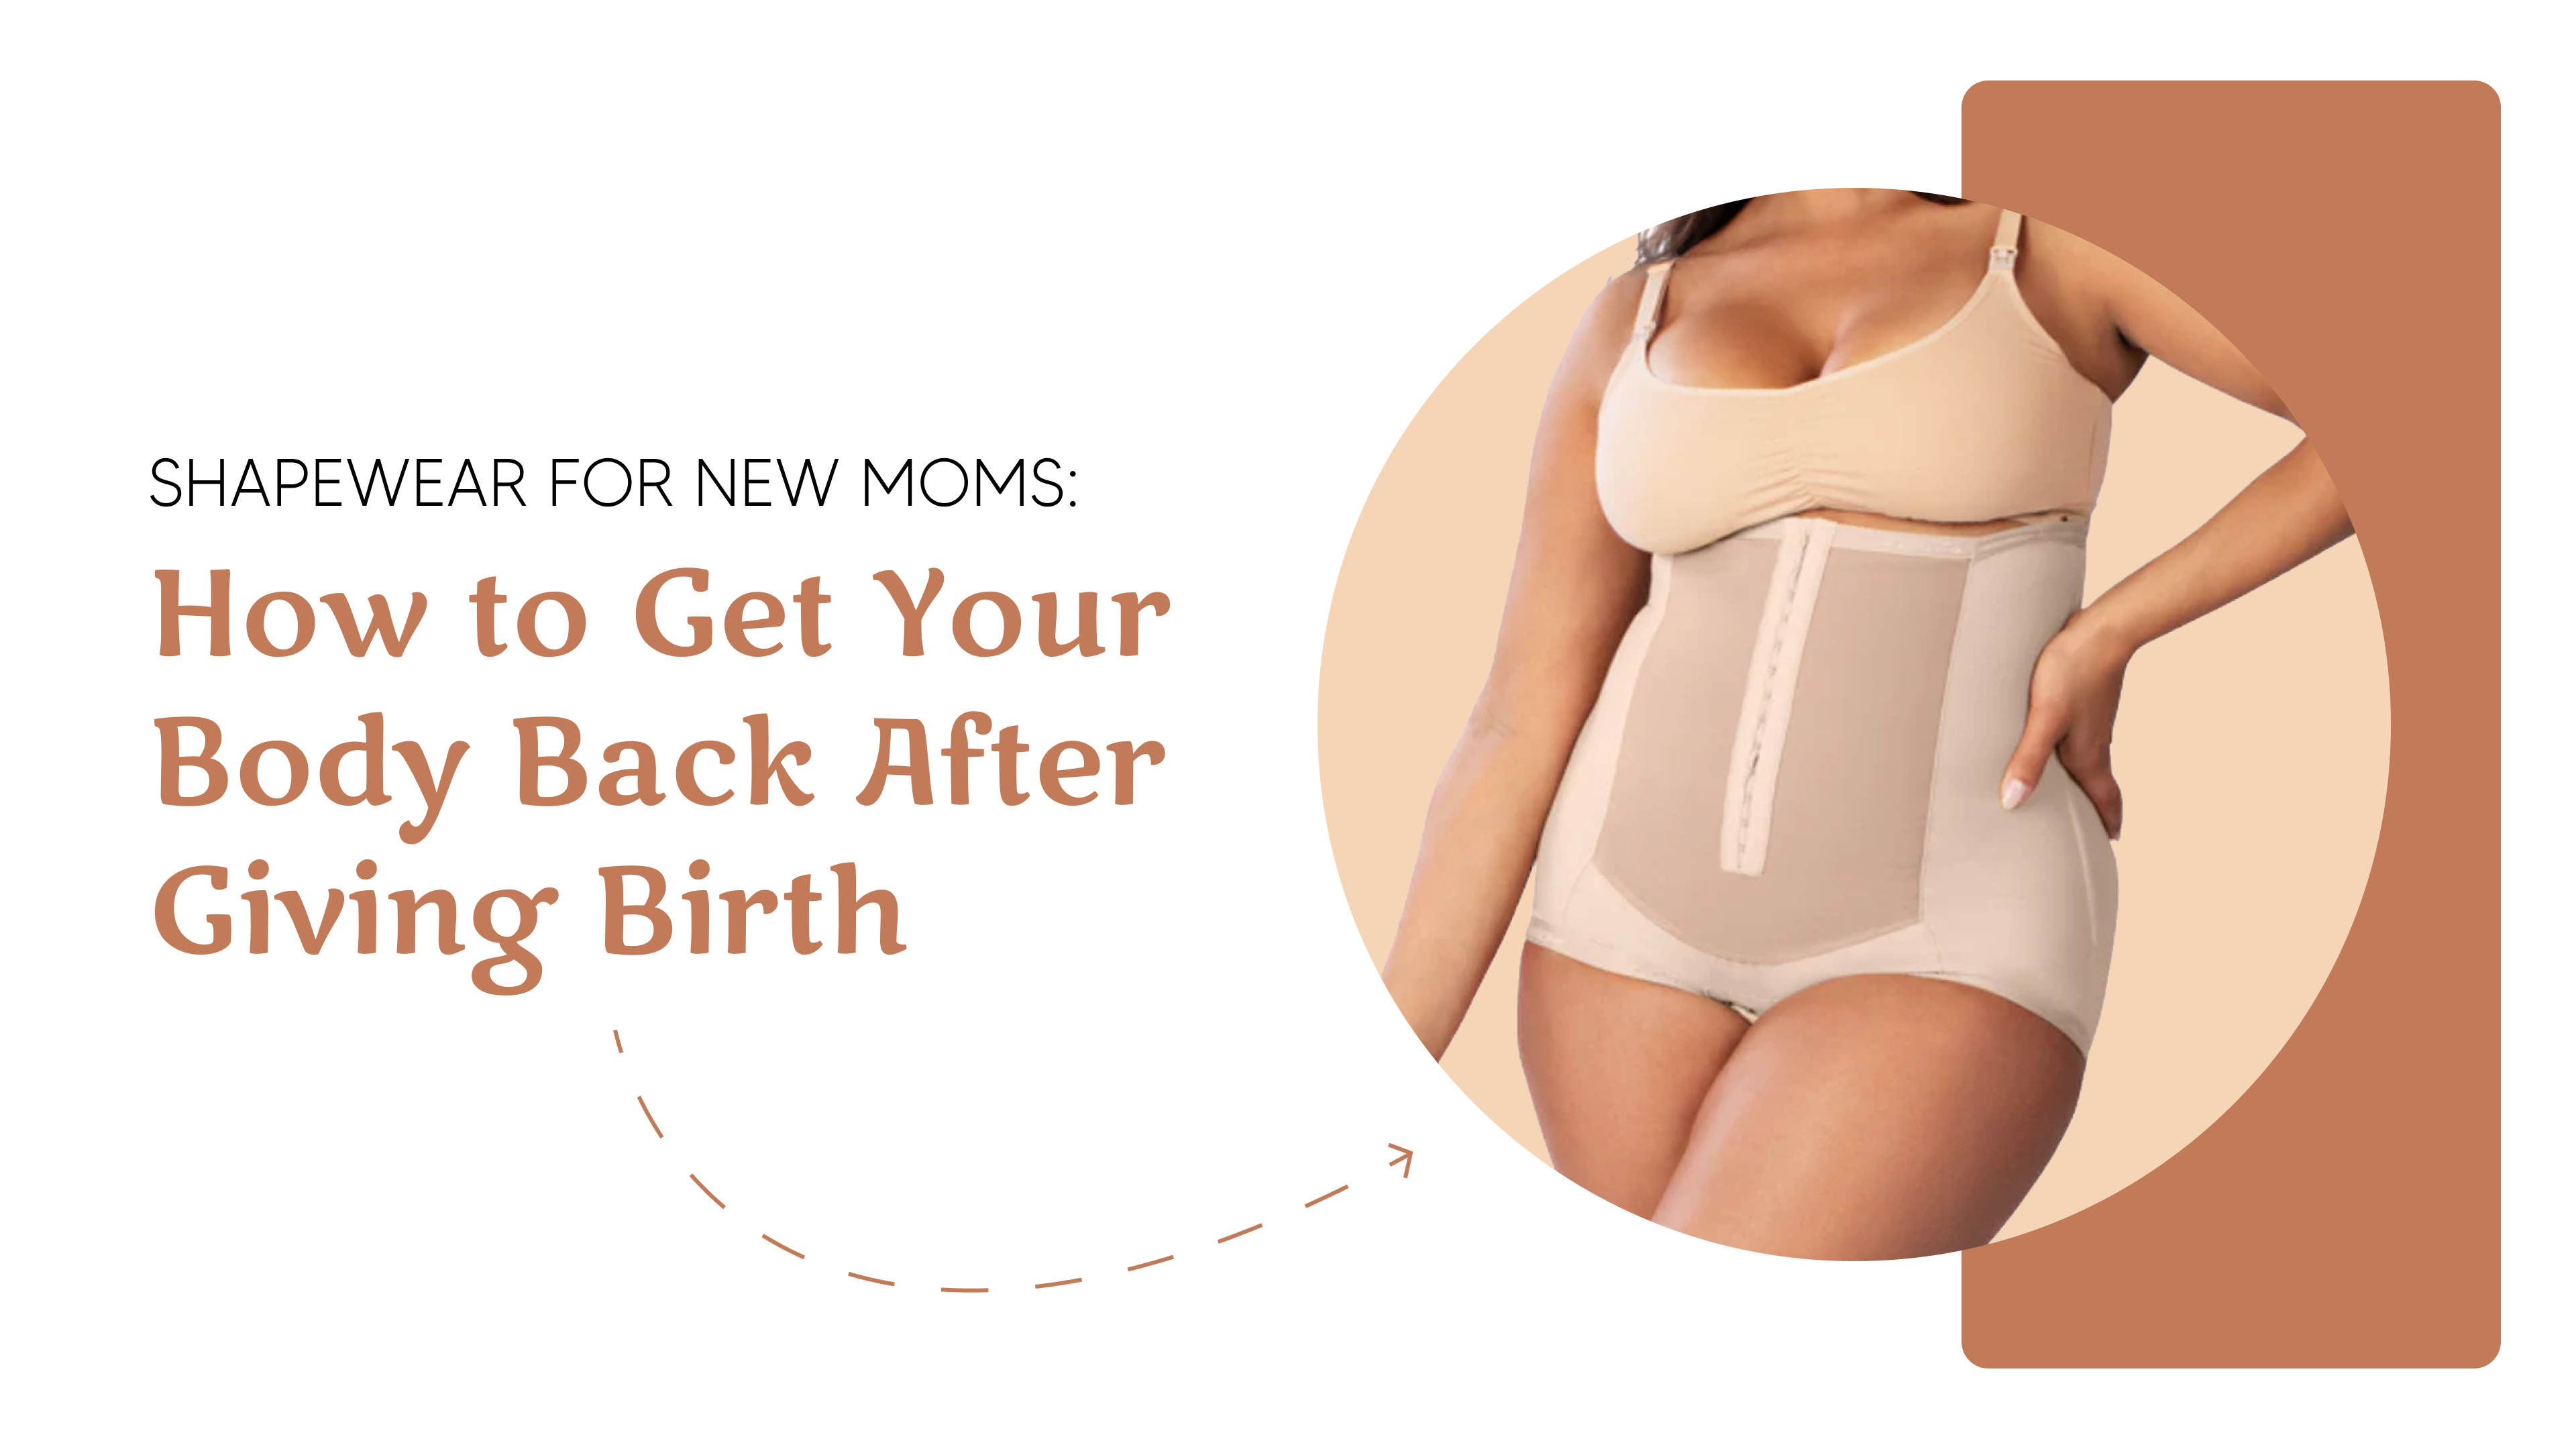 Shapewear for New Moms: How to Get Your Body Back After Giving Birth